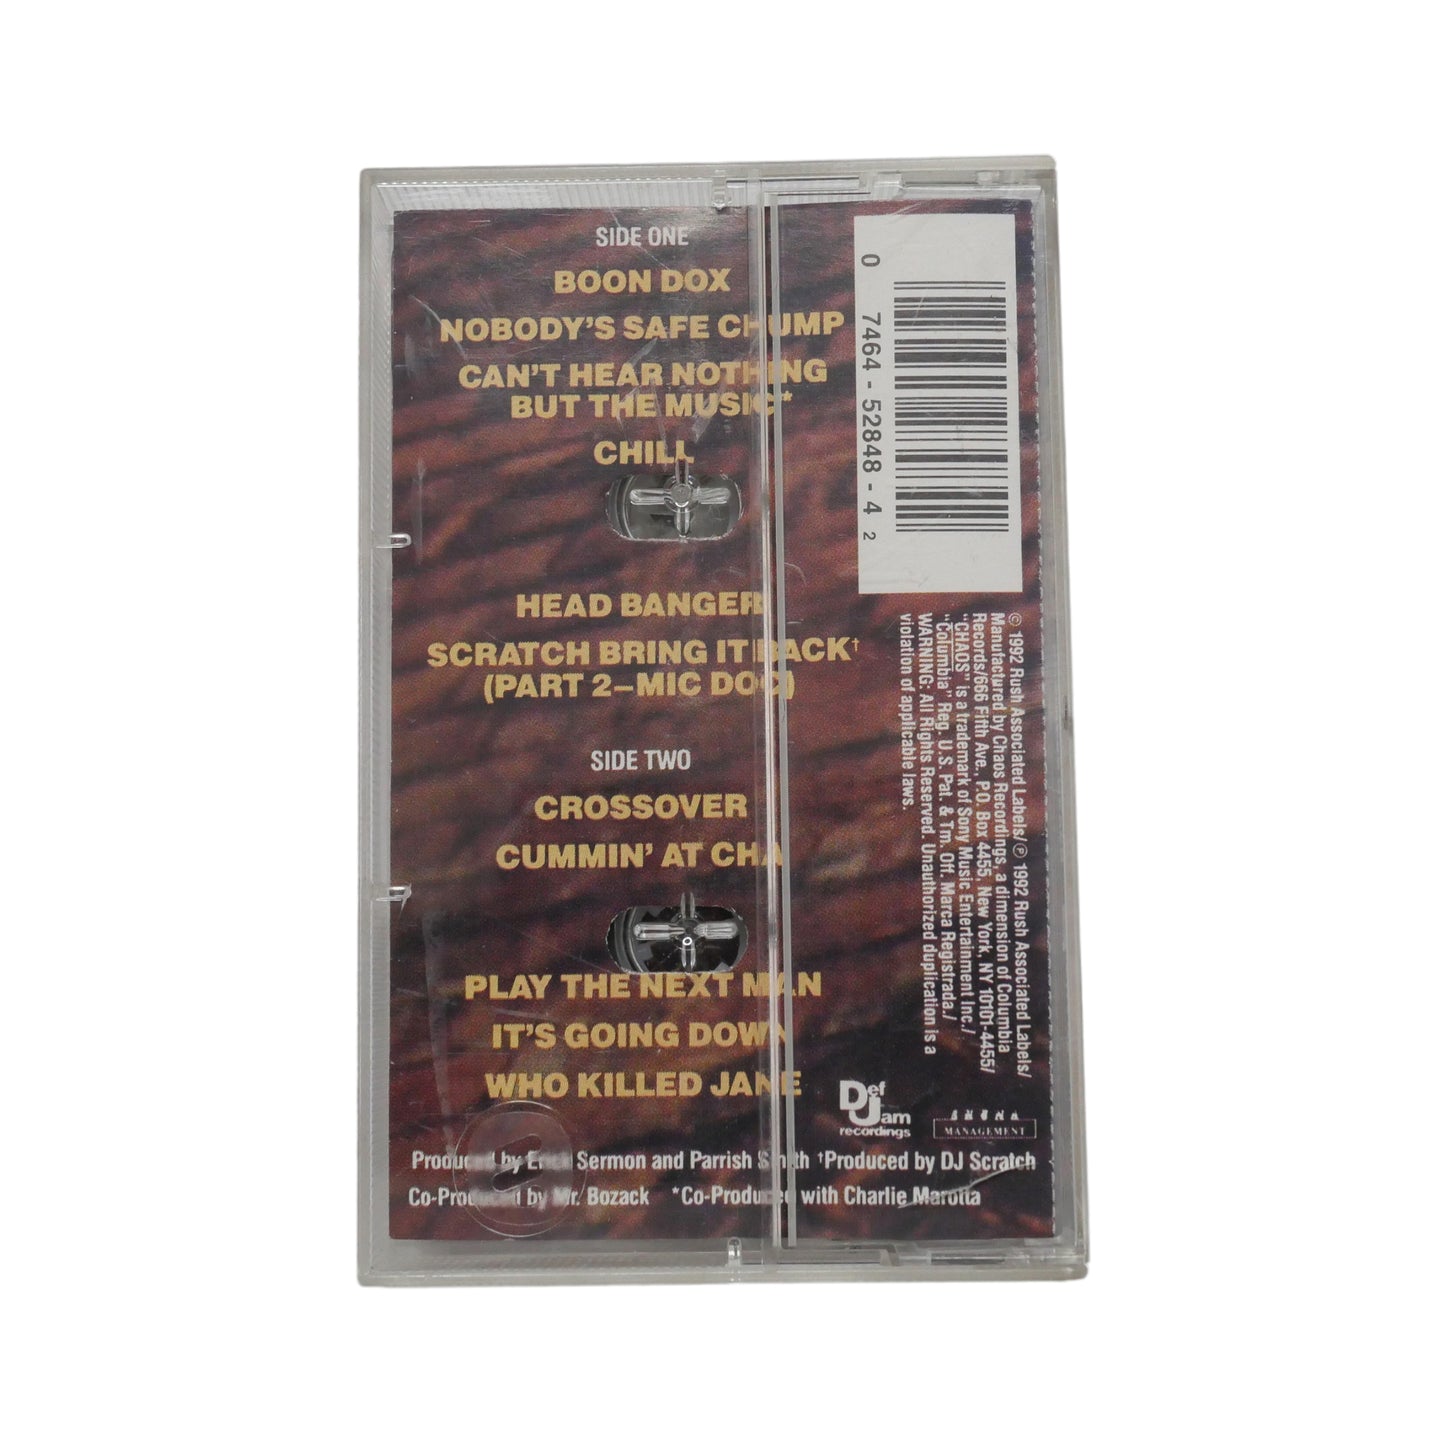 EPMD - 'Business Never Personal' Cassette